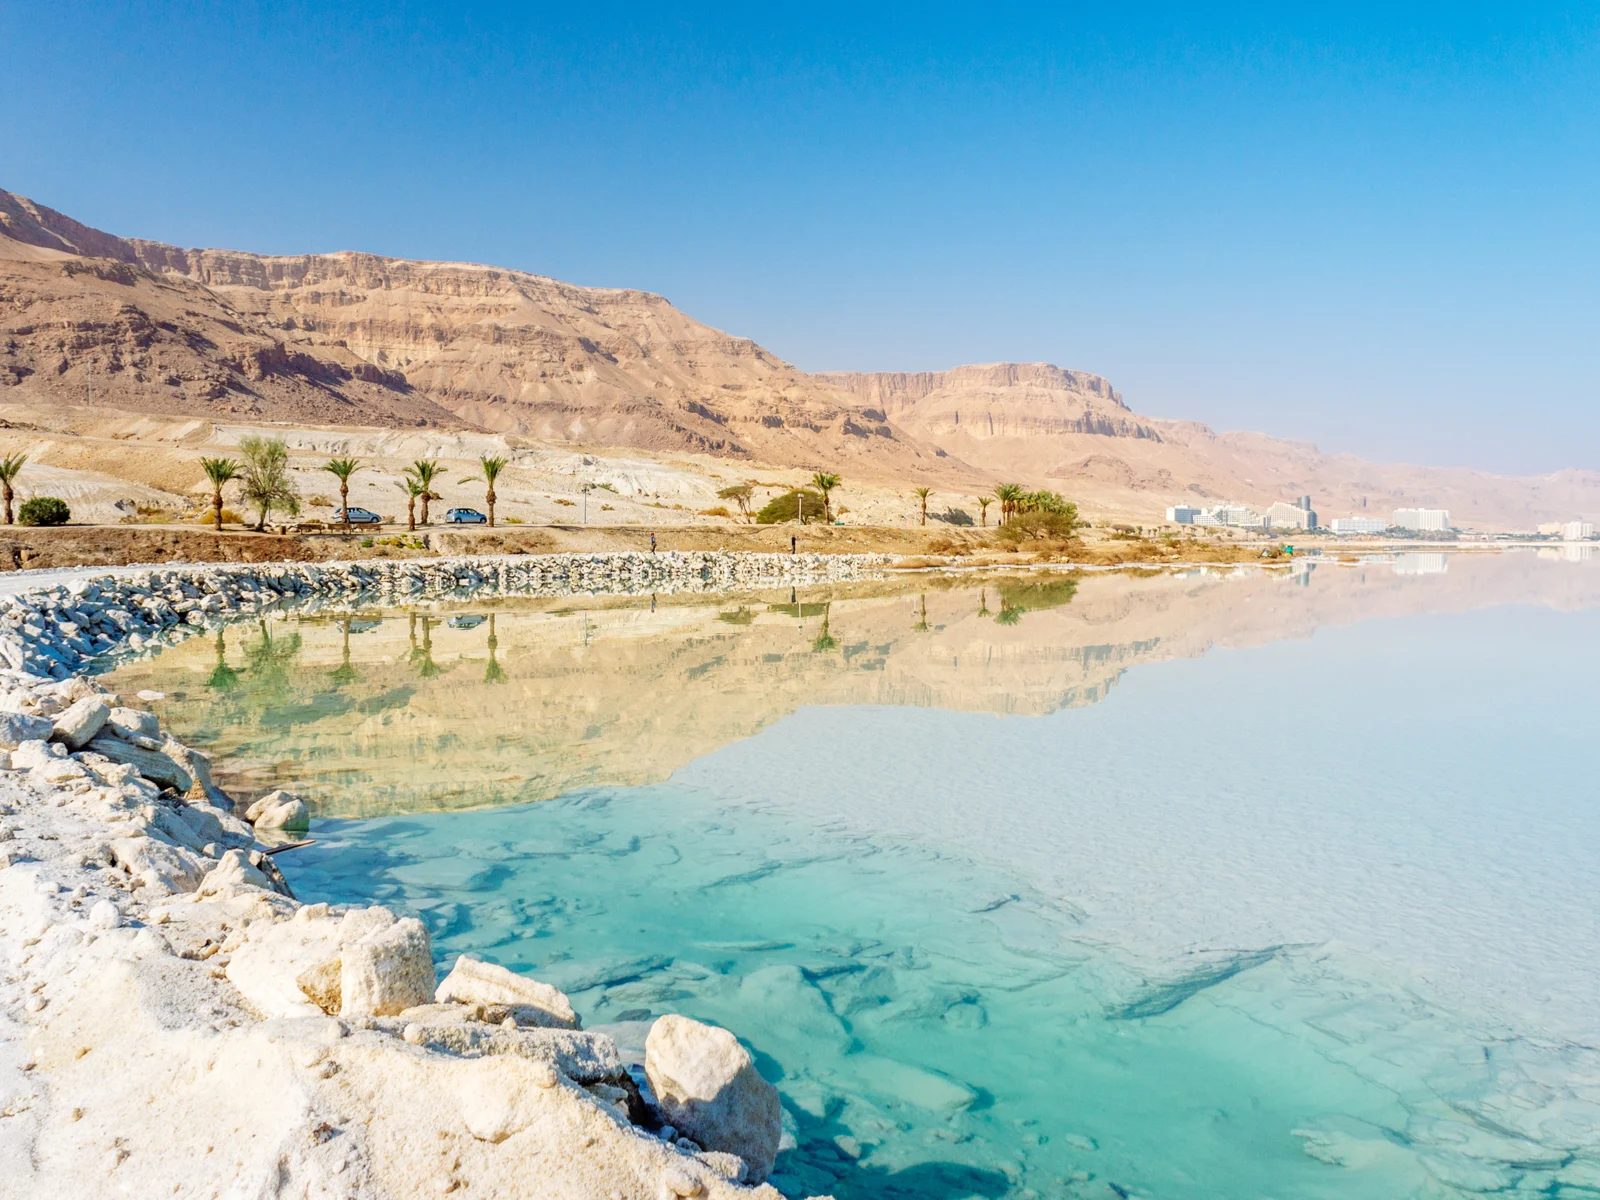 Dead sea coastline with salt deposits pictured during the cheapest time to visit Israel